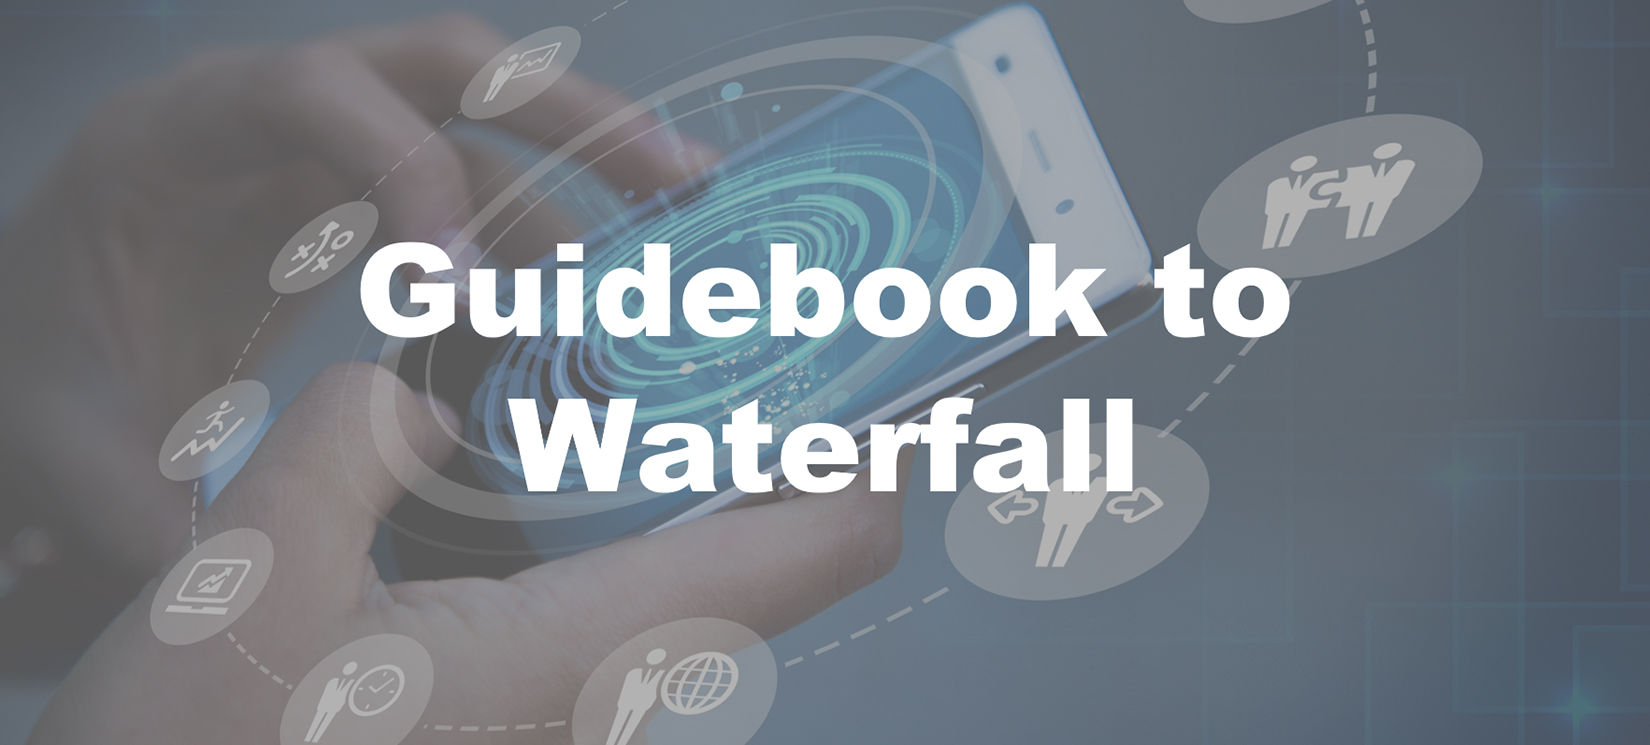 A Guidebook to Waterfall